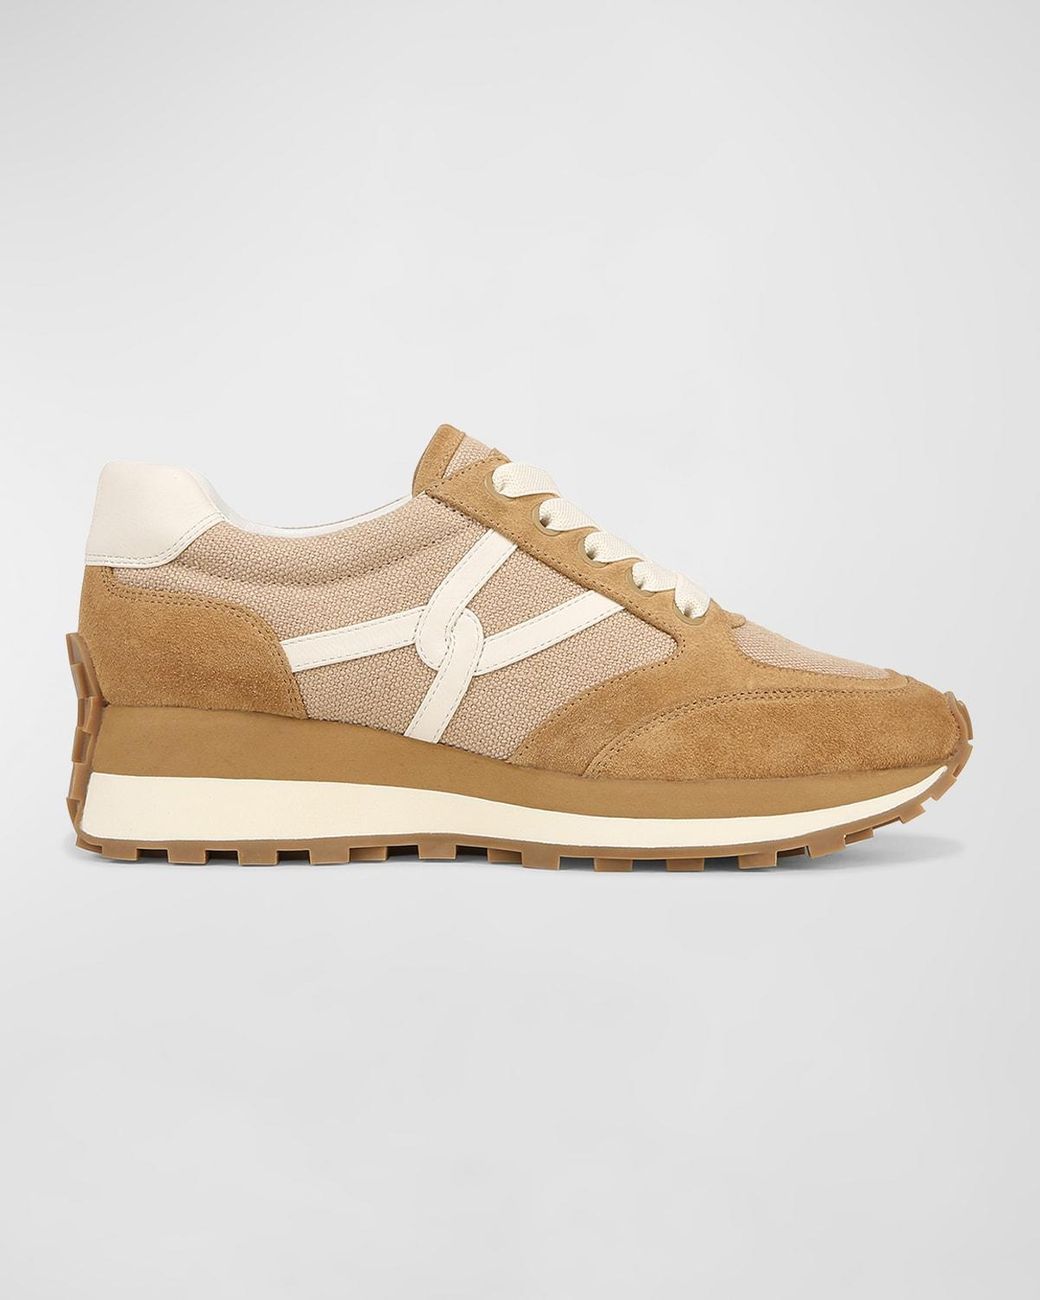 Veronica Beard Valentina Mixed Leather Retro Sneakers in Natural | Lyst